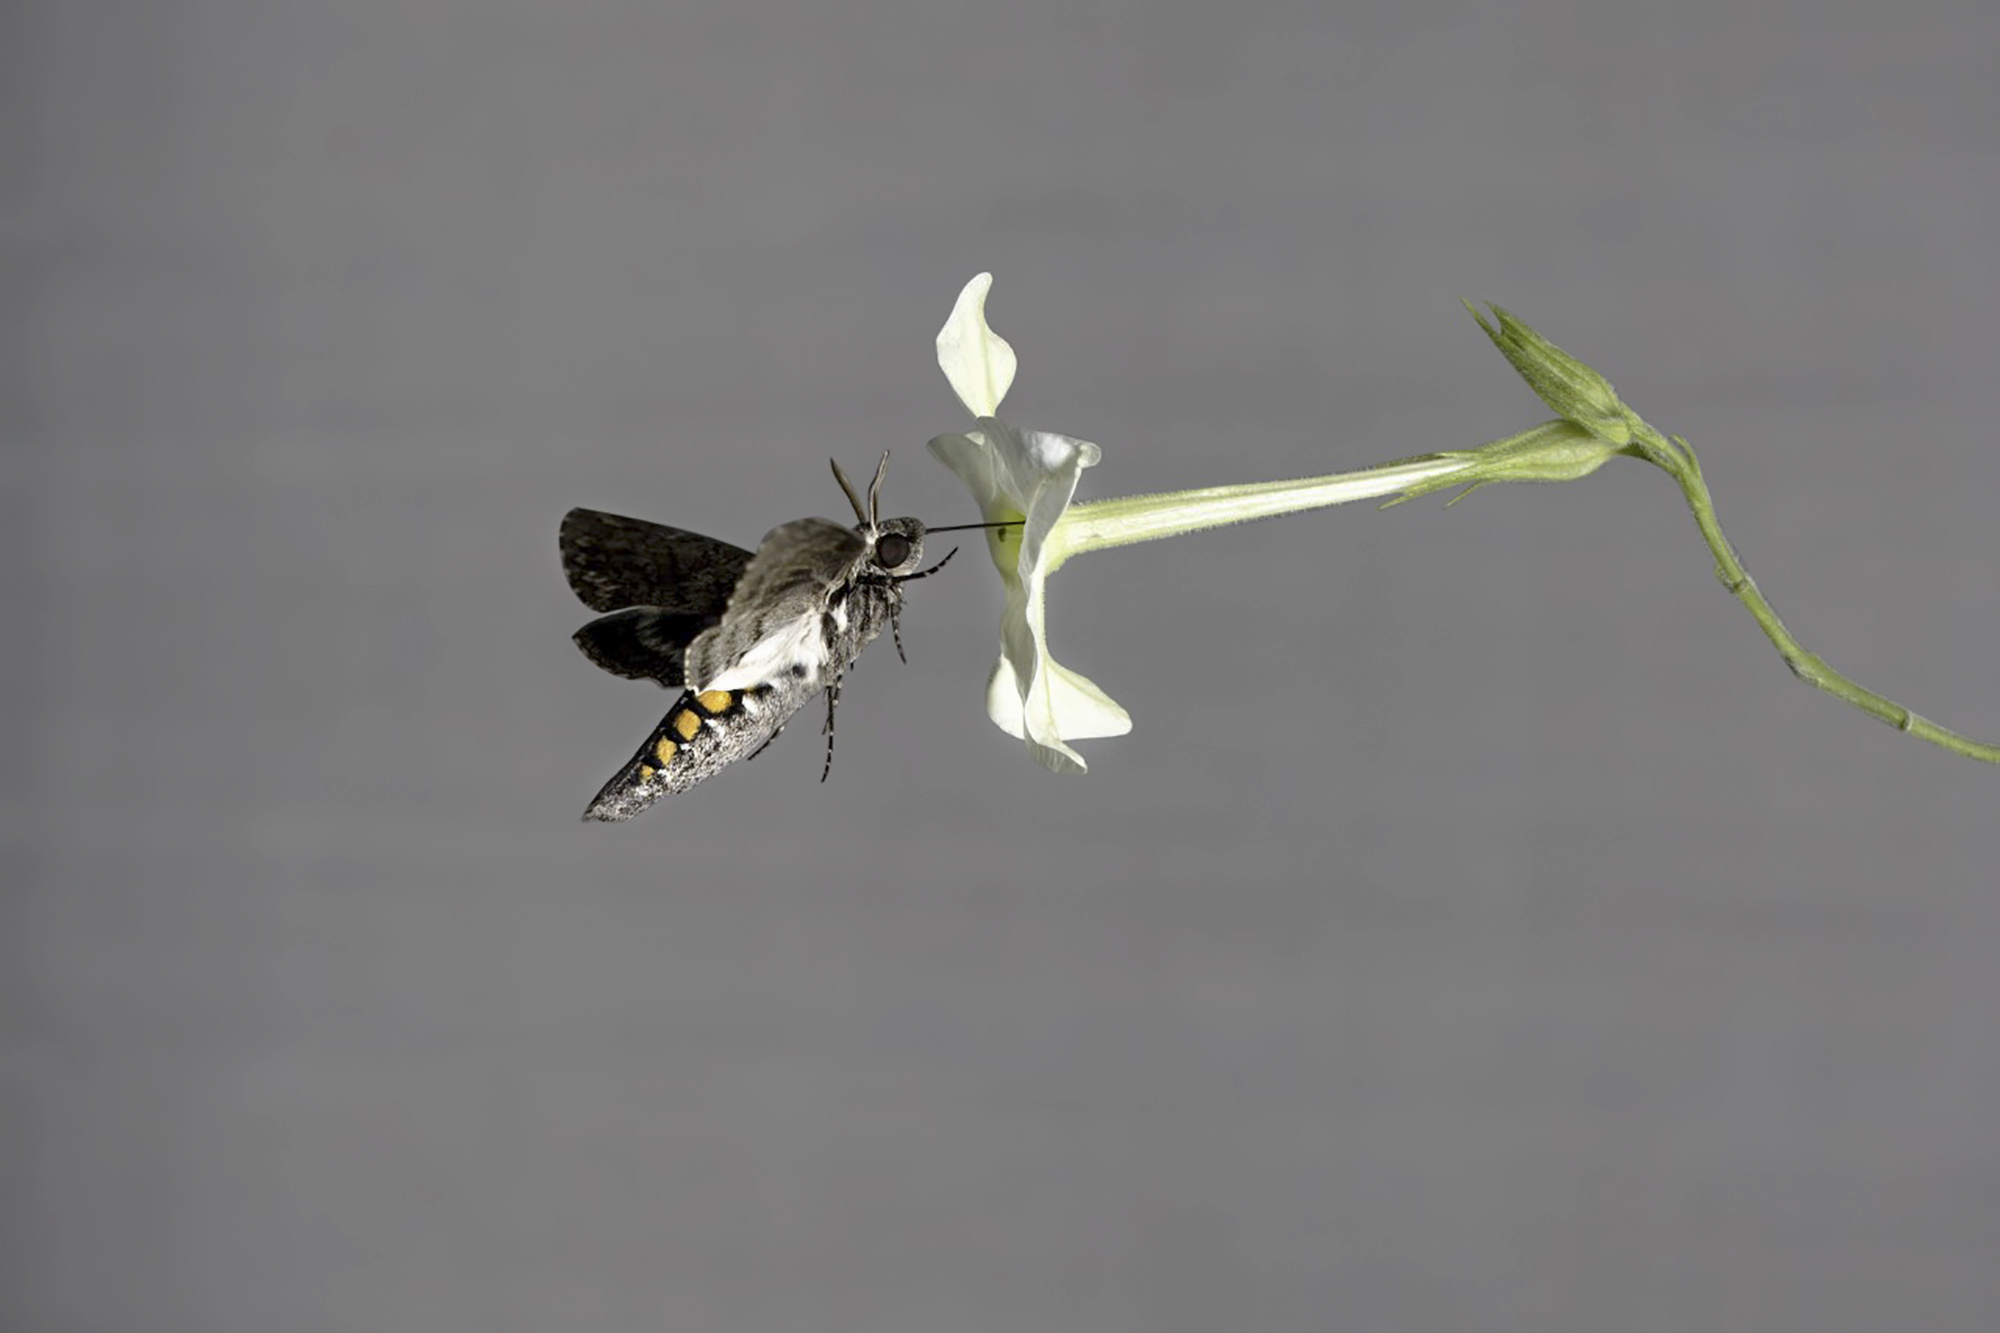 Study: Insect Can Re-Learn Flower Scents, Even as Pollution Alters Aroma